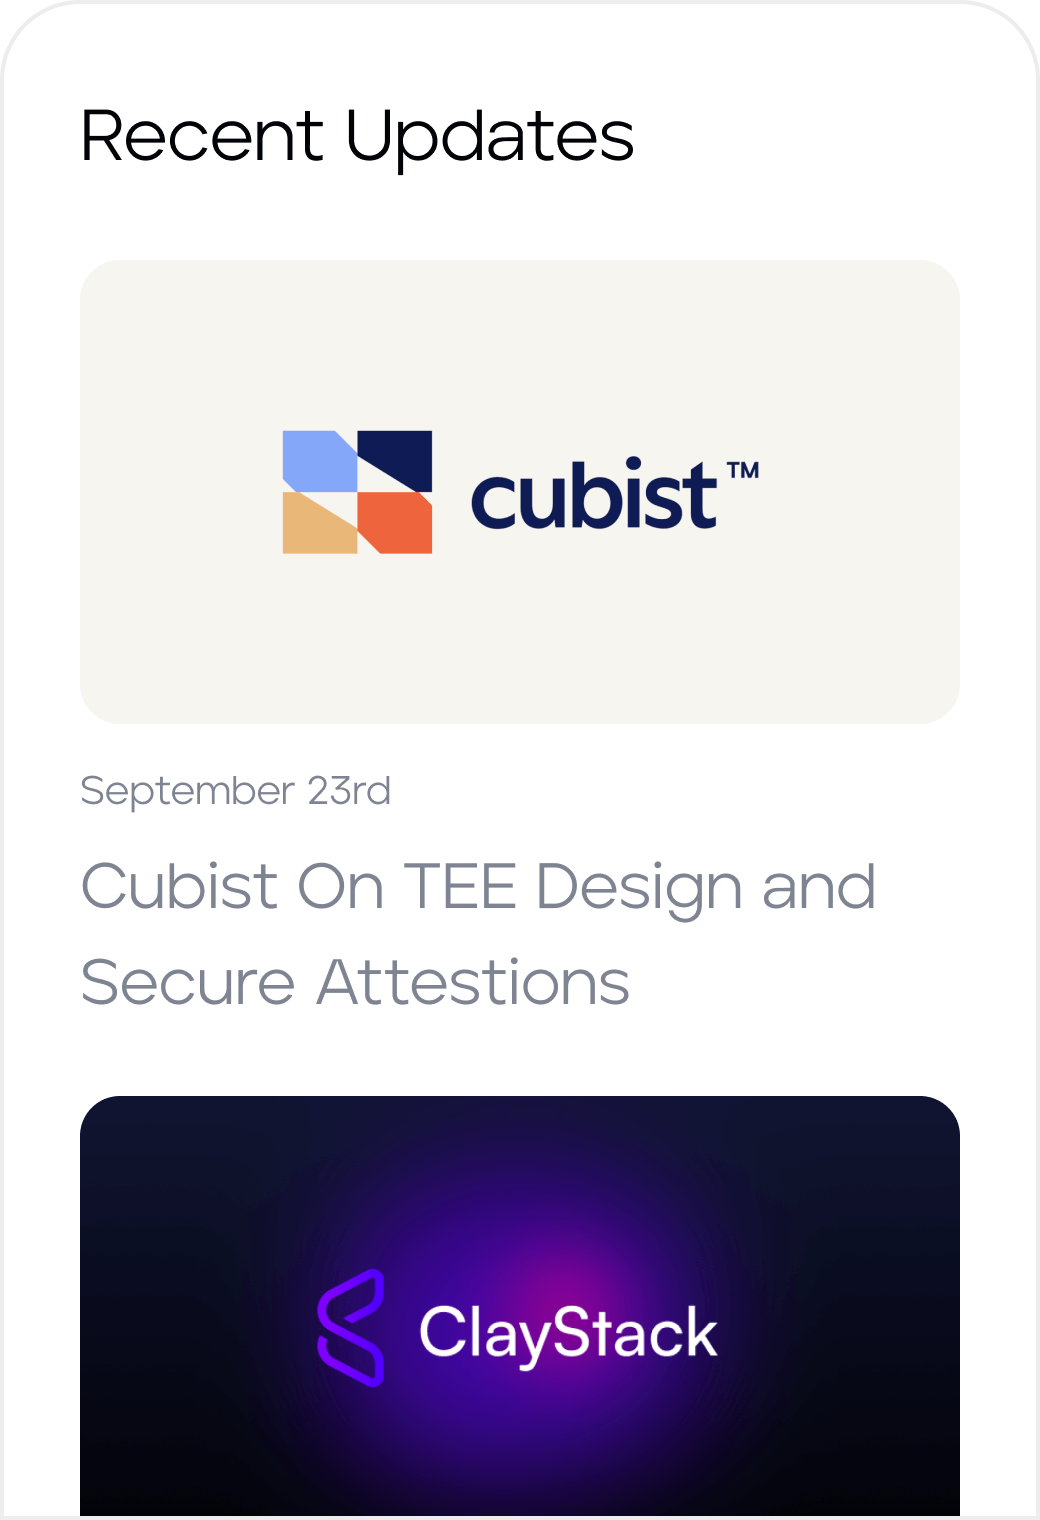 Recent updates on Cubist - Cubist on TEE Design and Secure Attestions and on ClayStack - ClayStack Natively Supports DVT; for Ion Protocol Desktop Version